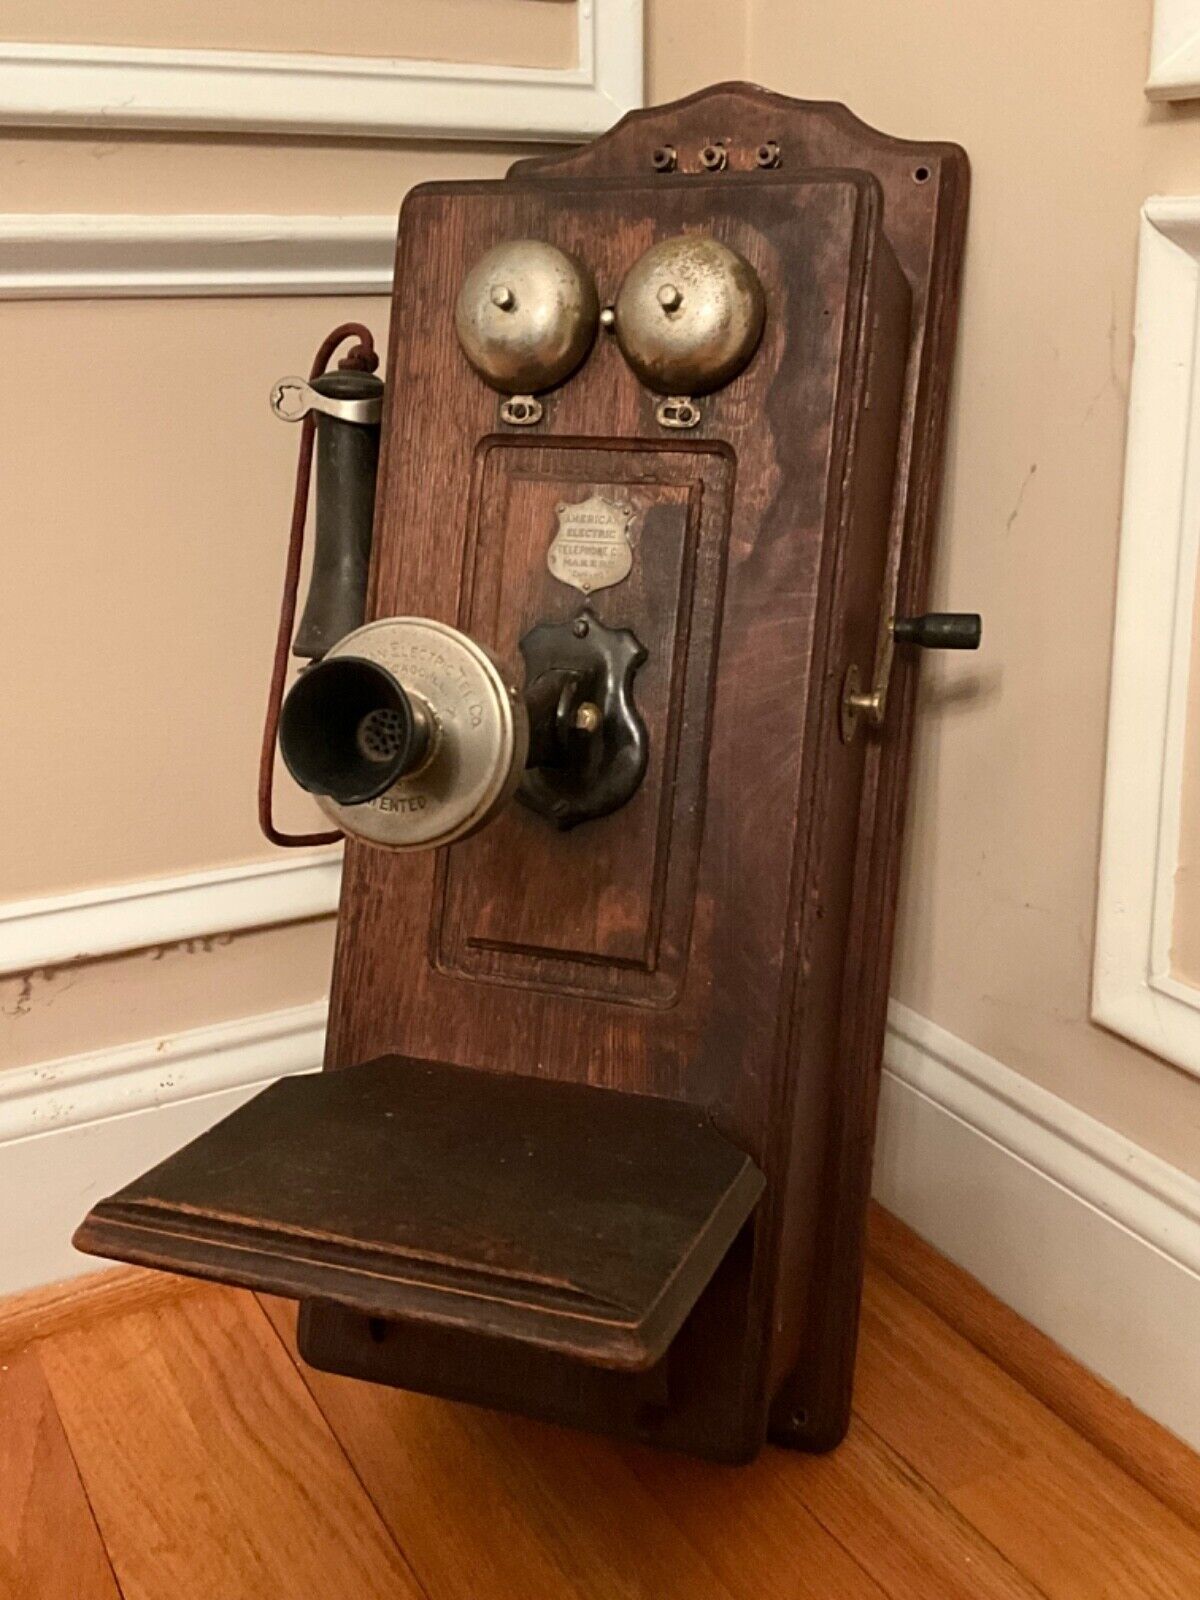 Antique AMERICAN ELECTRIC TELEPHONE Co. CHICAGO Hand Crank Wall Phone